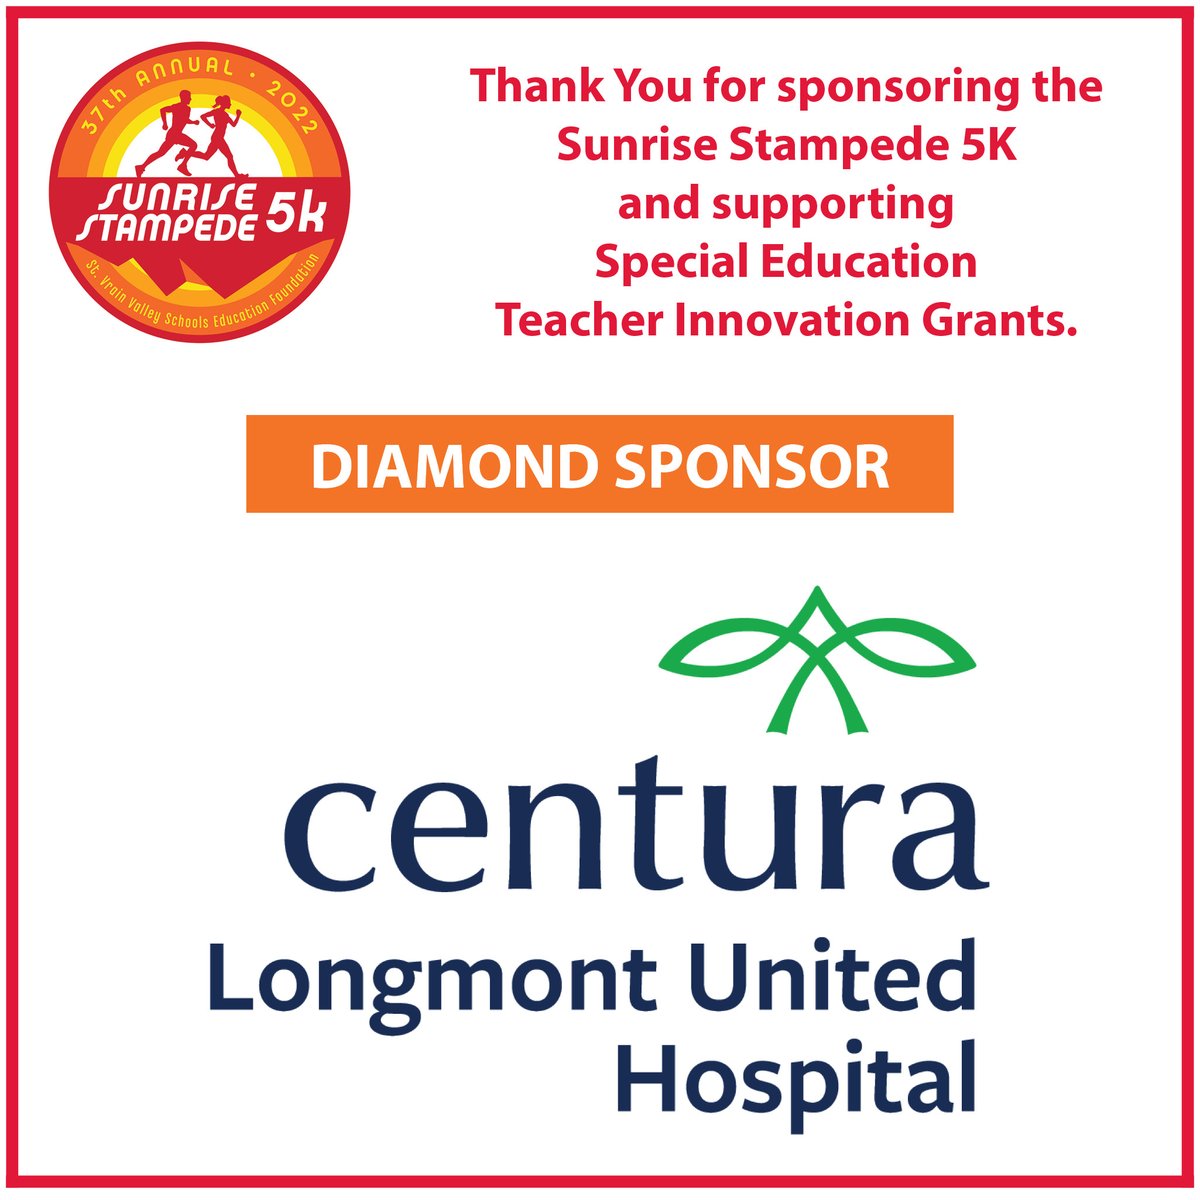 Thank you @LongmontUnited and @CenturaHealth for supporting the Sunrise Stampede 5K this Saturday! FYI, runners and walkers, registration with a t-shirt end at 12pm TODAY (August 9th)! After 12pm, registration will not include a t-shirt (our order is due today). Thank you LUH!